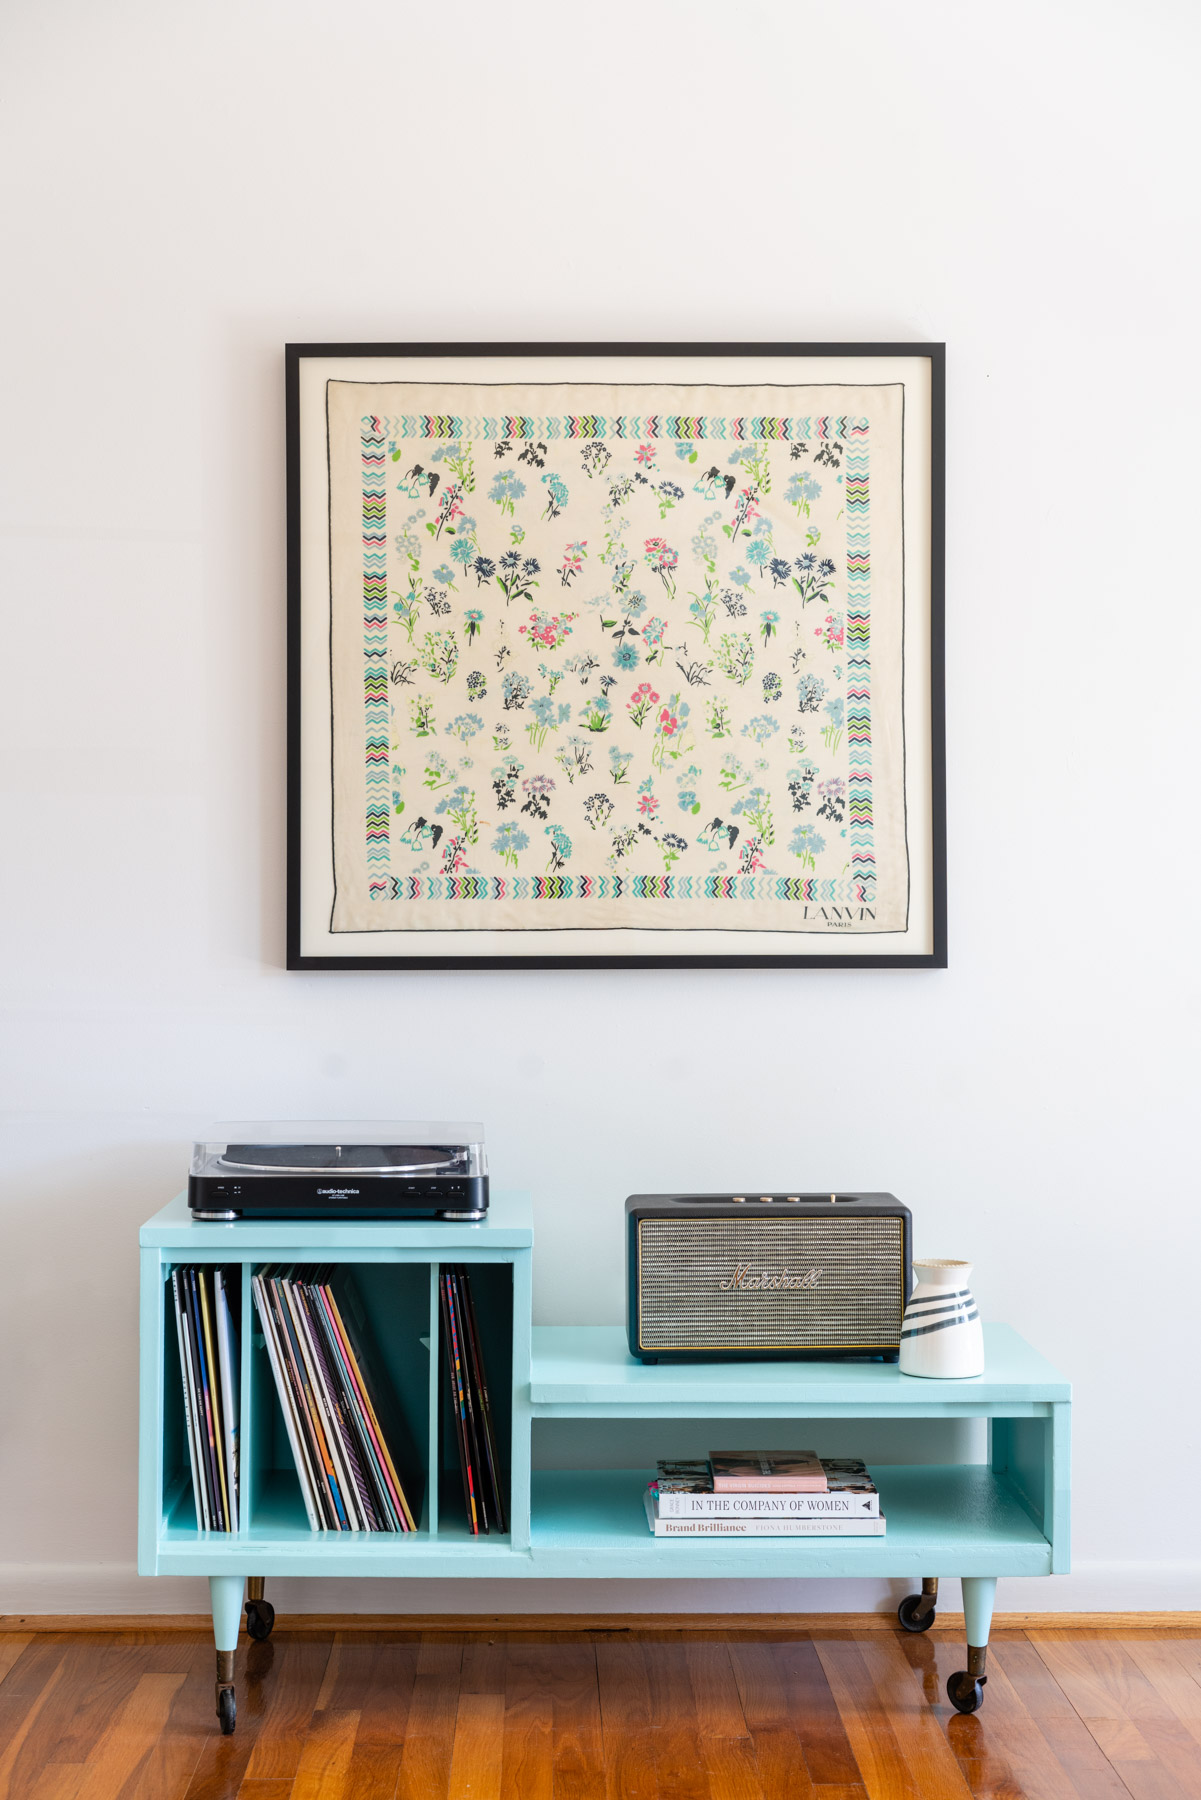 A vintage Lanvin silk scarf hanging above a blue record player table. 